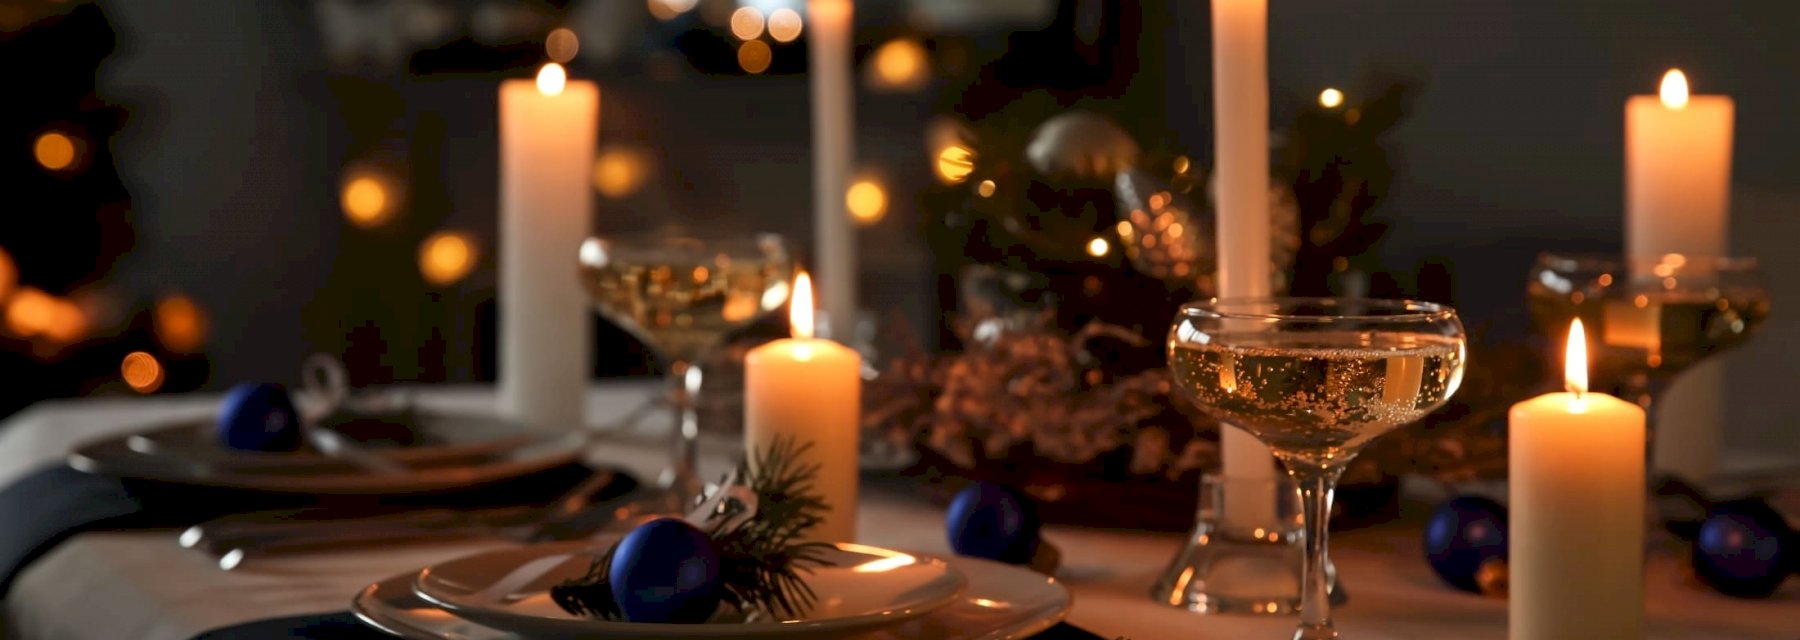 Delicious festive drinks: Adding a little sparkle to the table